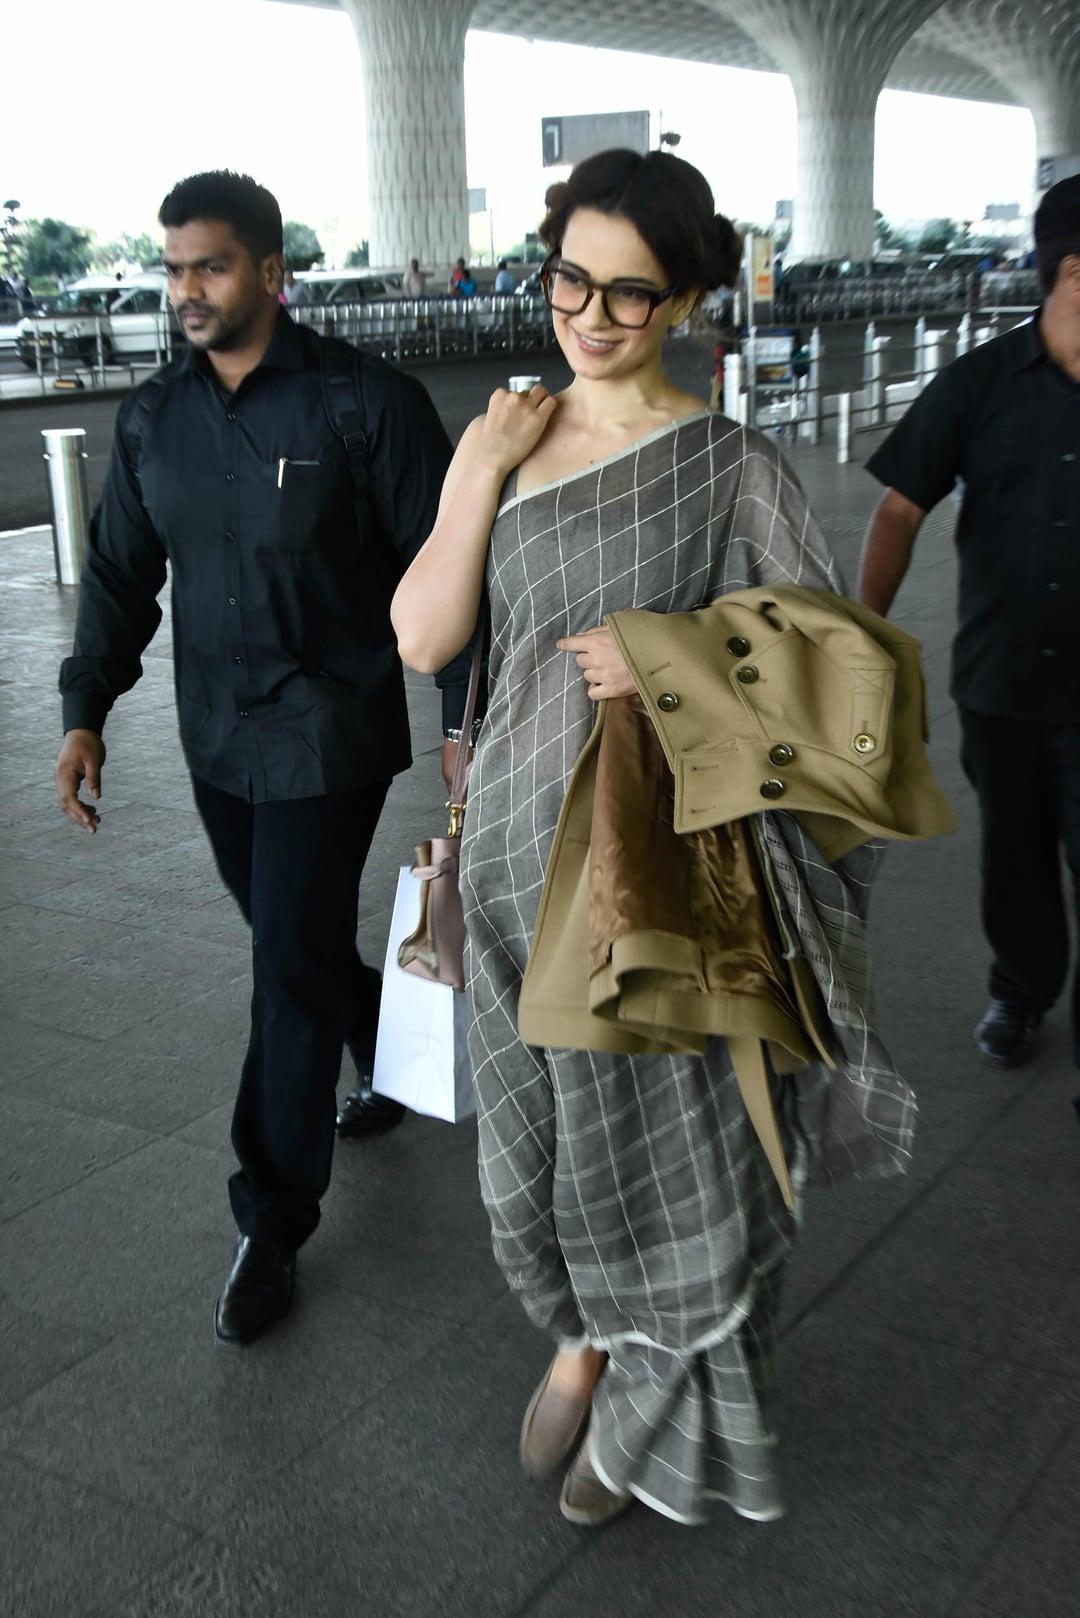 The grey saree, crafted with delicate draping and subtle embellishments, enhanced her grace and poise. The addition of glasses added an intellectual and trendy edge to her ensemble, making a statement that fashion can be functional.